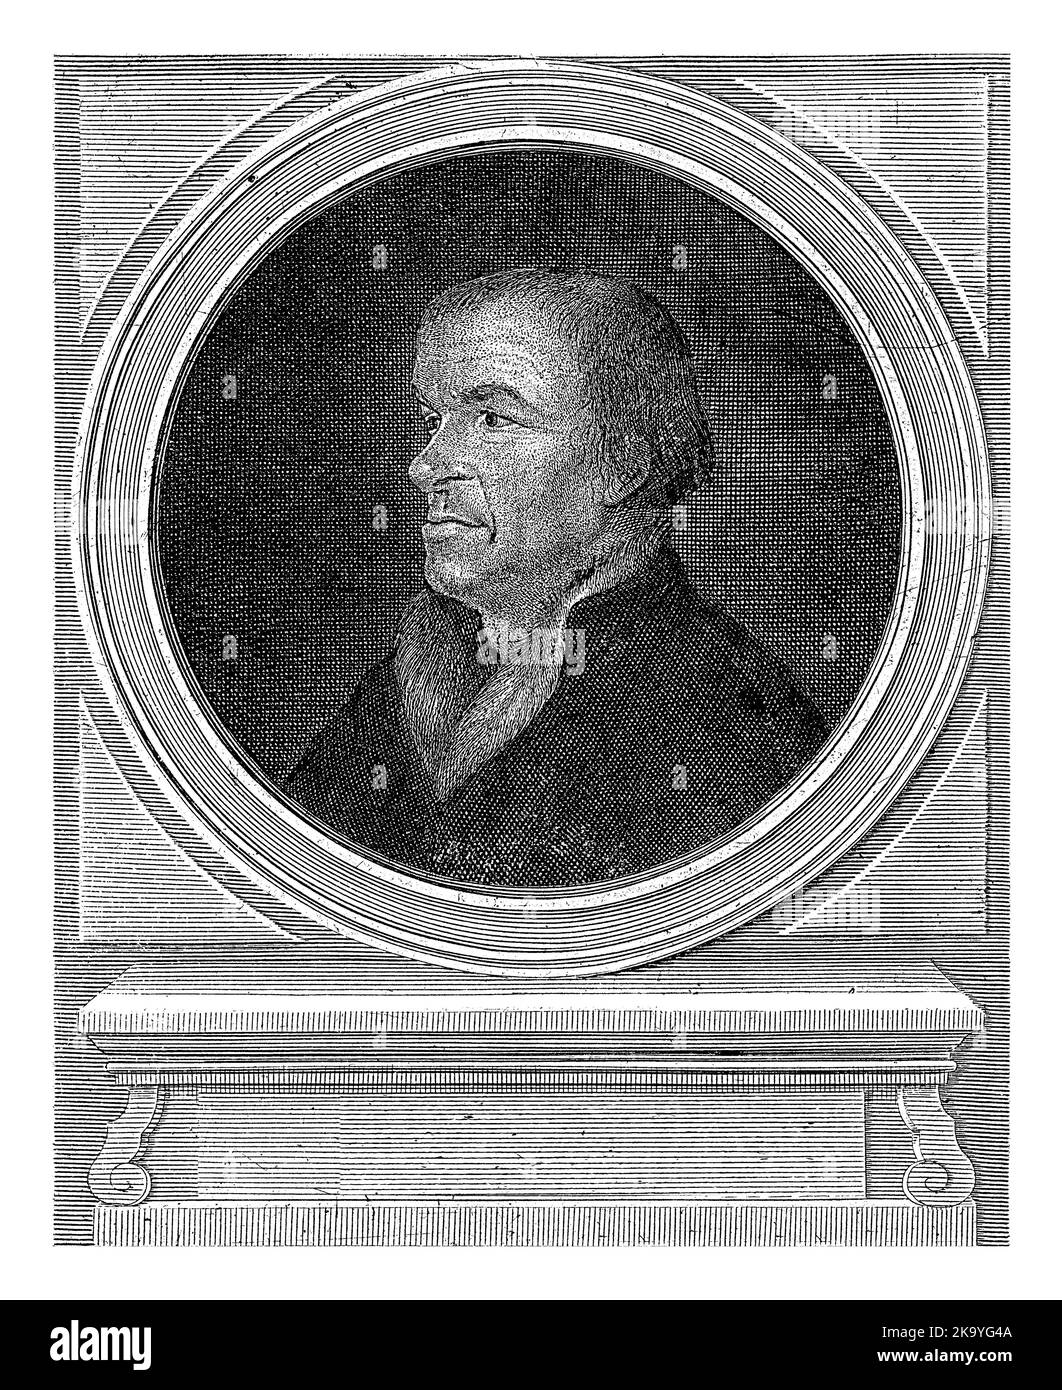 The German scholar, printer and publisher Johann Froben (Johannes Frobenius). He wears a coat with a fur collar. Stock Photo